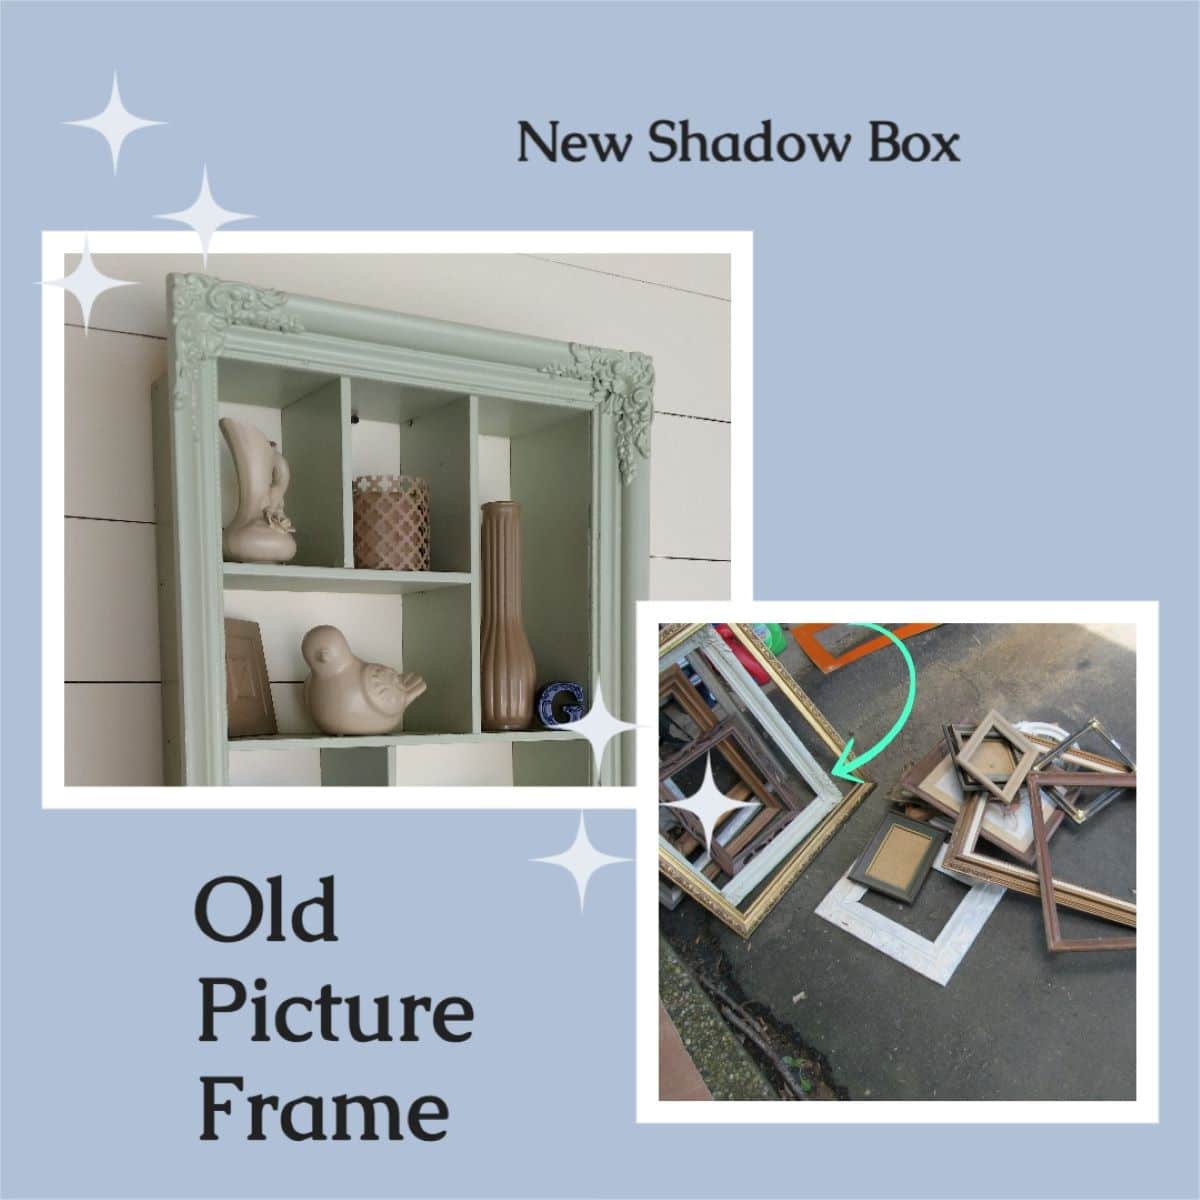 How to Display Keepsakes in a Shadow Box Without Gluing Them Down